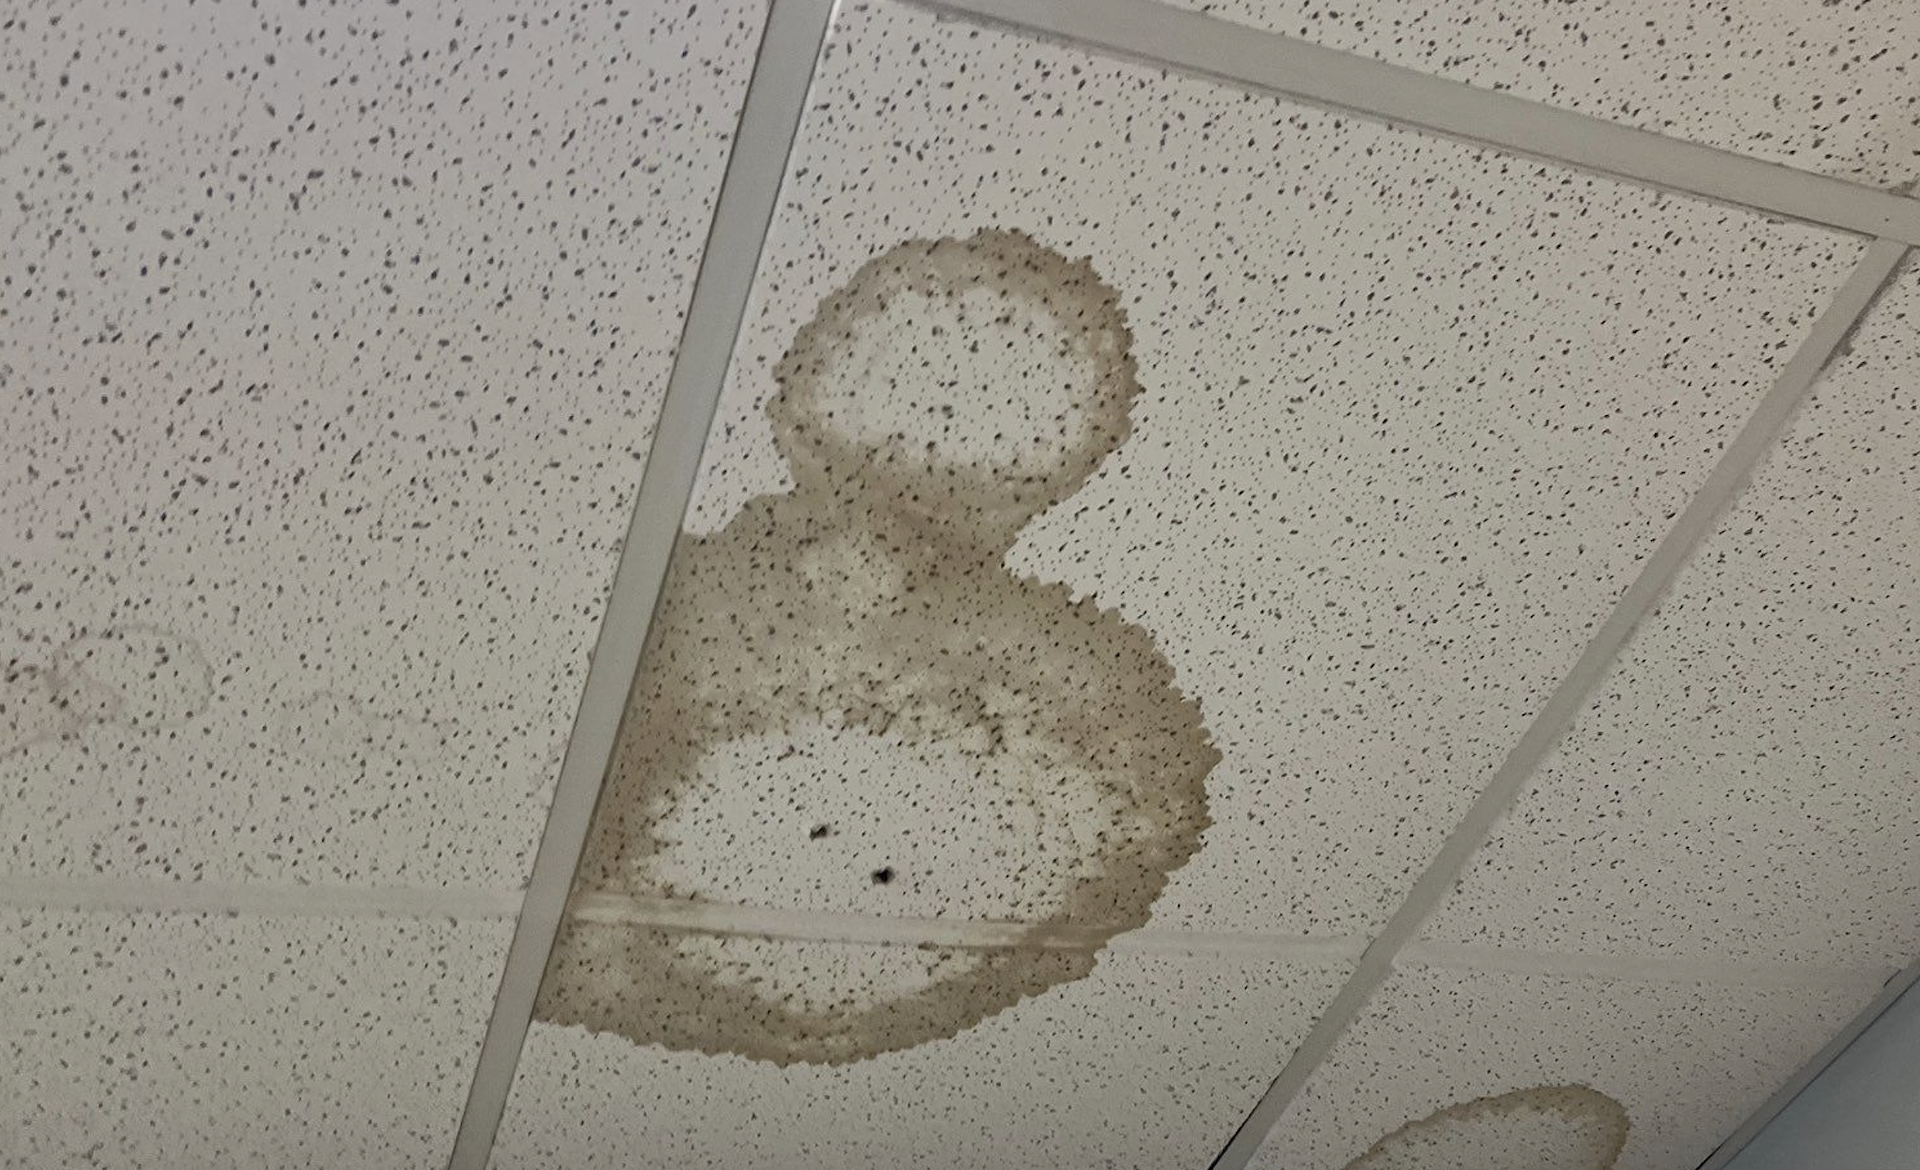 Why Does My Commercial Building Have Brown Spots on the Ceiling?